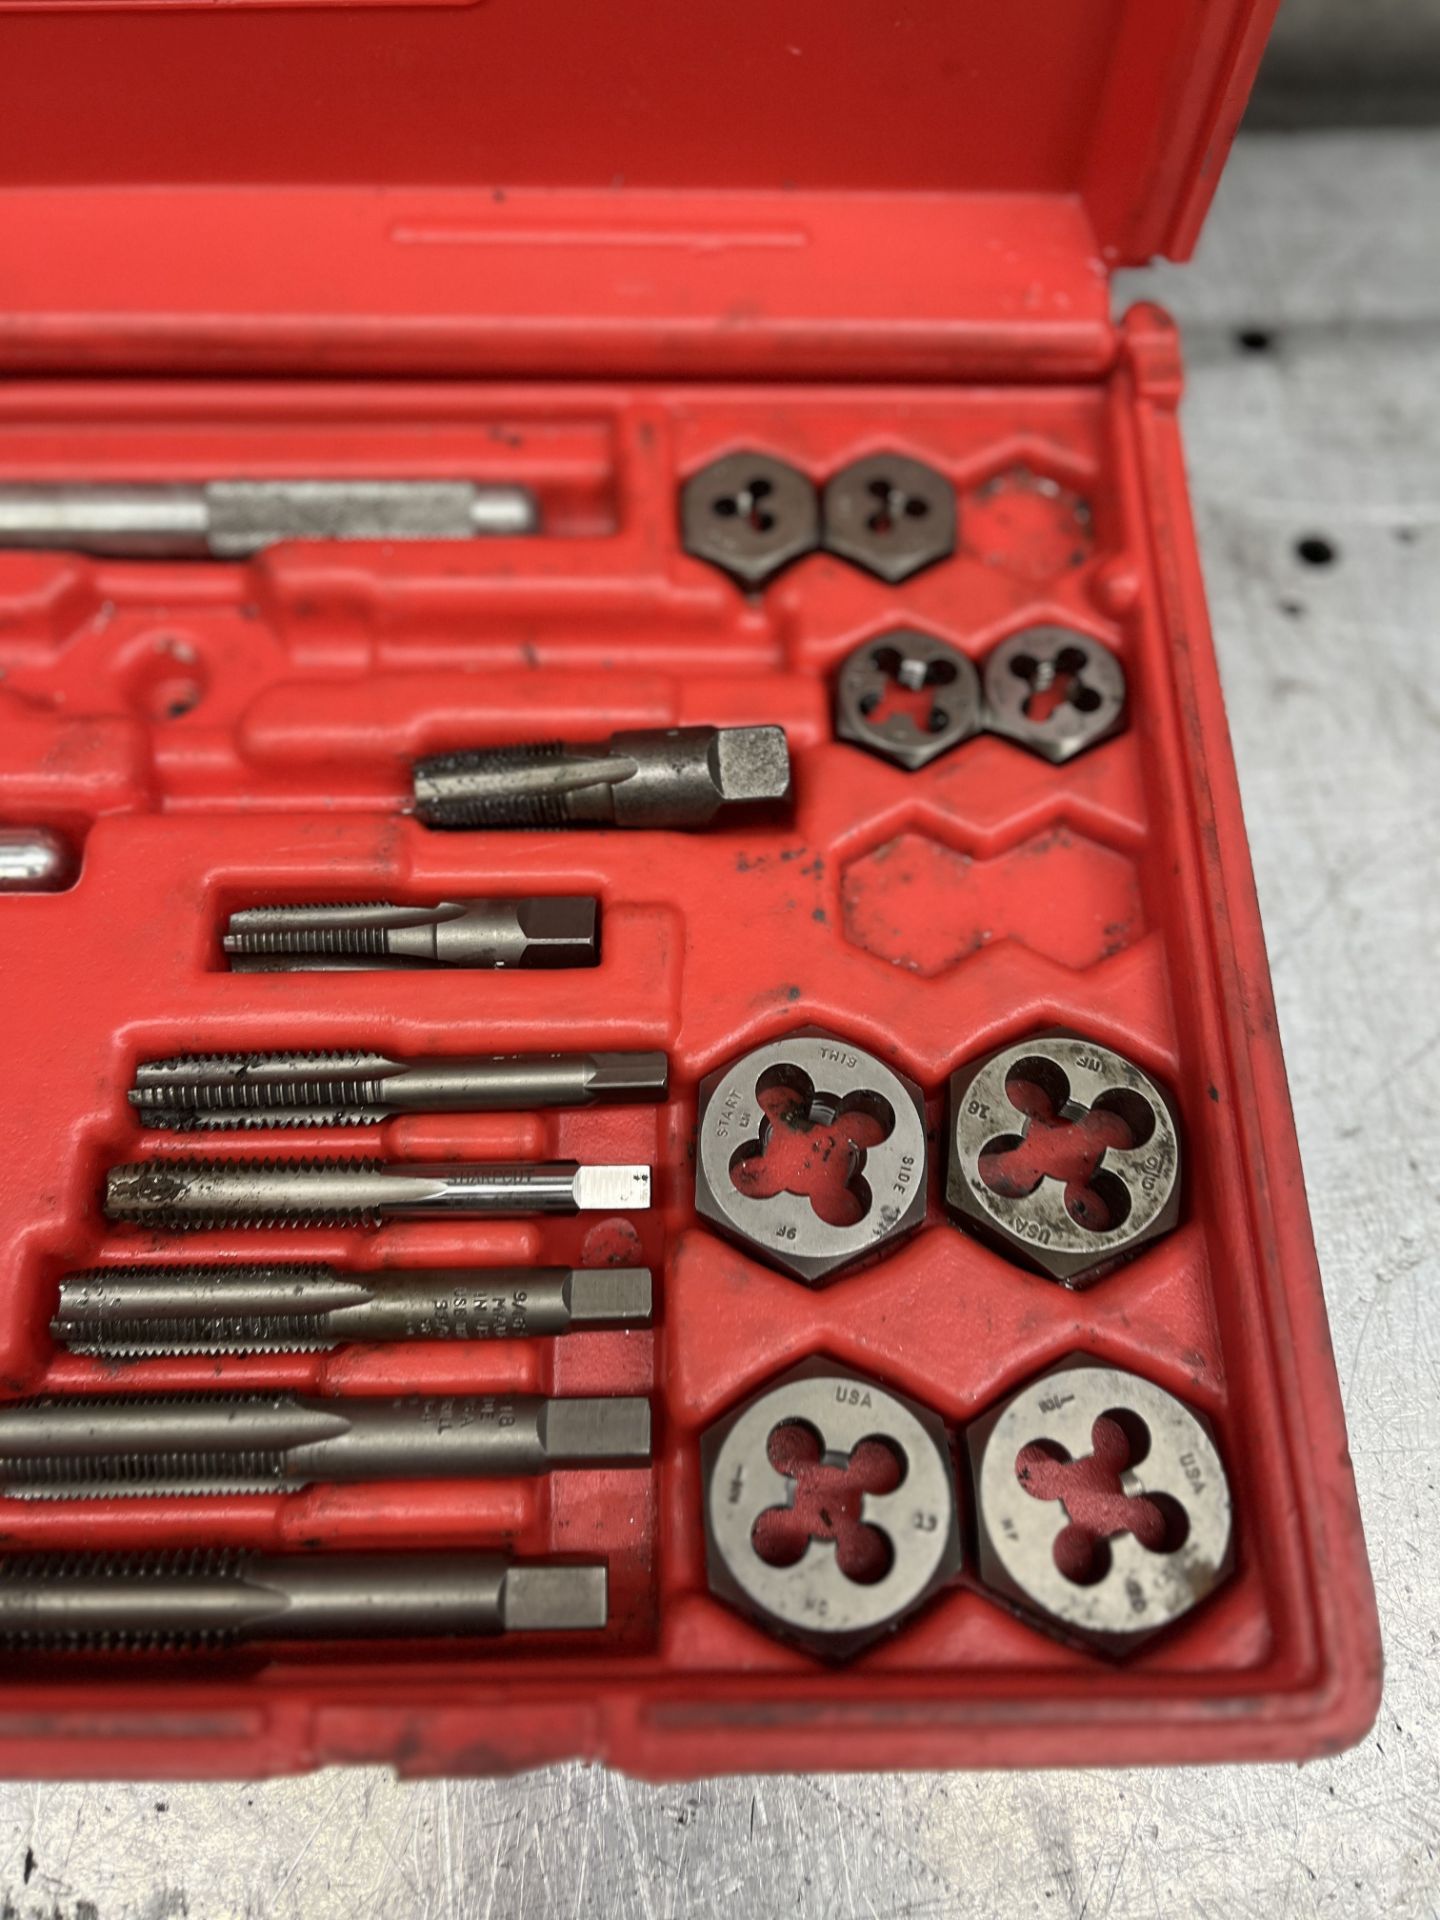 VERMONT TAP AND DIE SET WITH WRENCHES IN CASE - Image 10 of 10